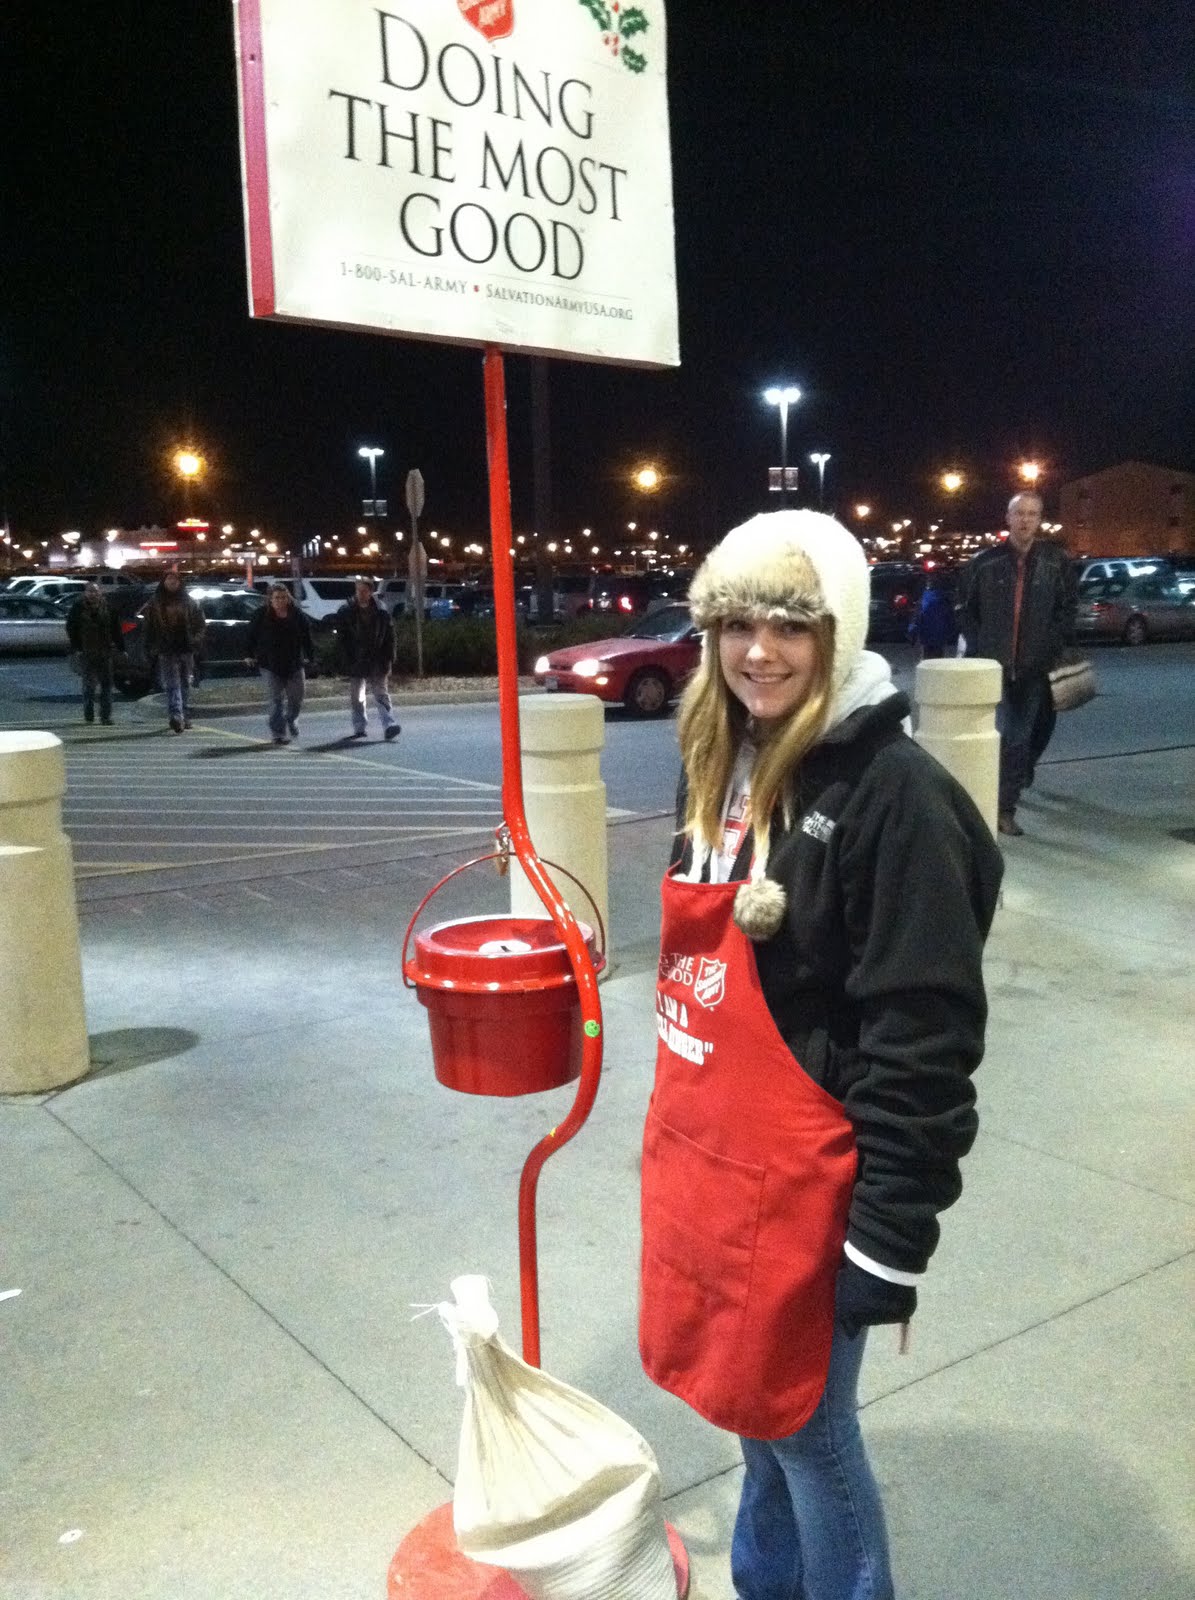 Life is Great with Eight Salvation Army Bell Ringing!